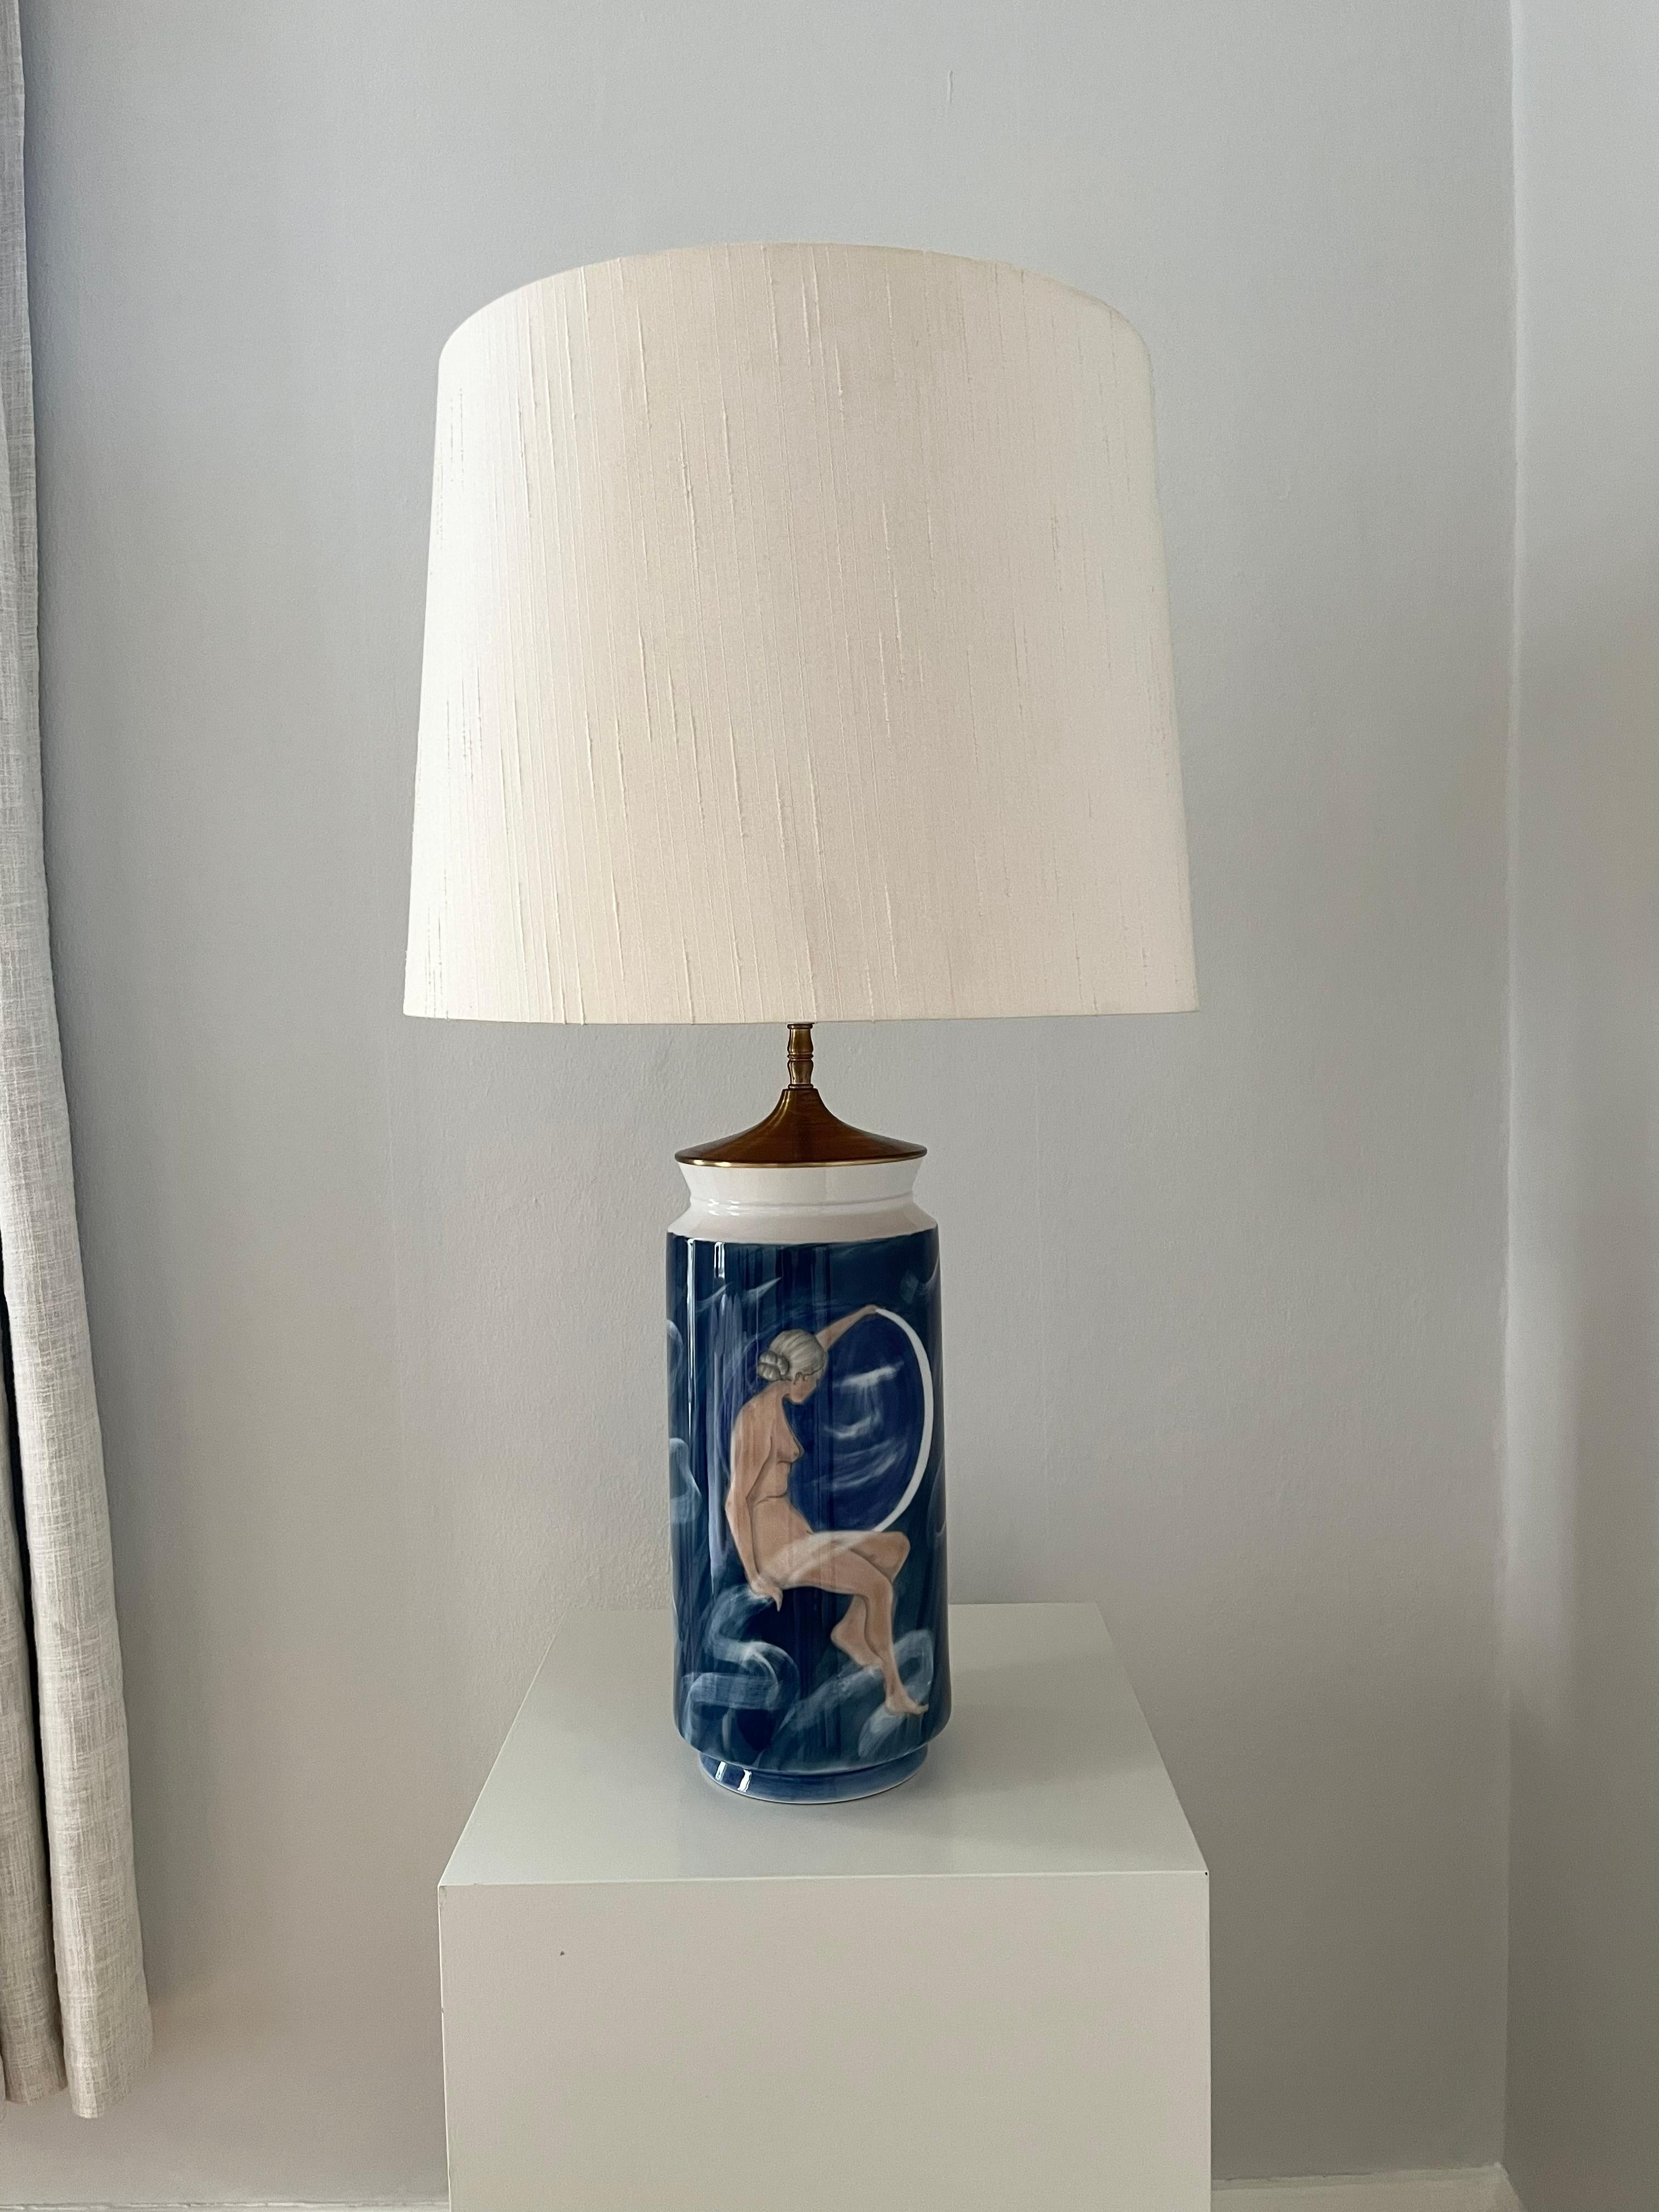 Tall and beautiful, this art deco style porcelain table lamp was designed in the 1920s by Danish artist and architect Arnold Krog (1856-1931) for Royal Copenhagen. 

Originally designed as a floor vase and mounted as a table lamp with a brass part.